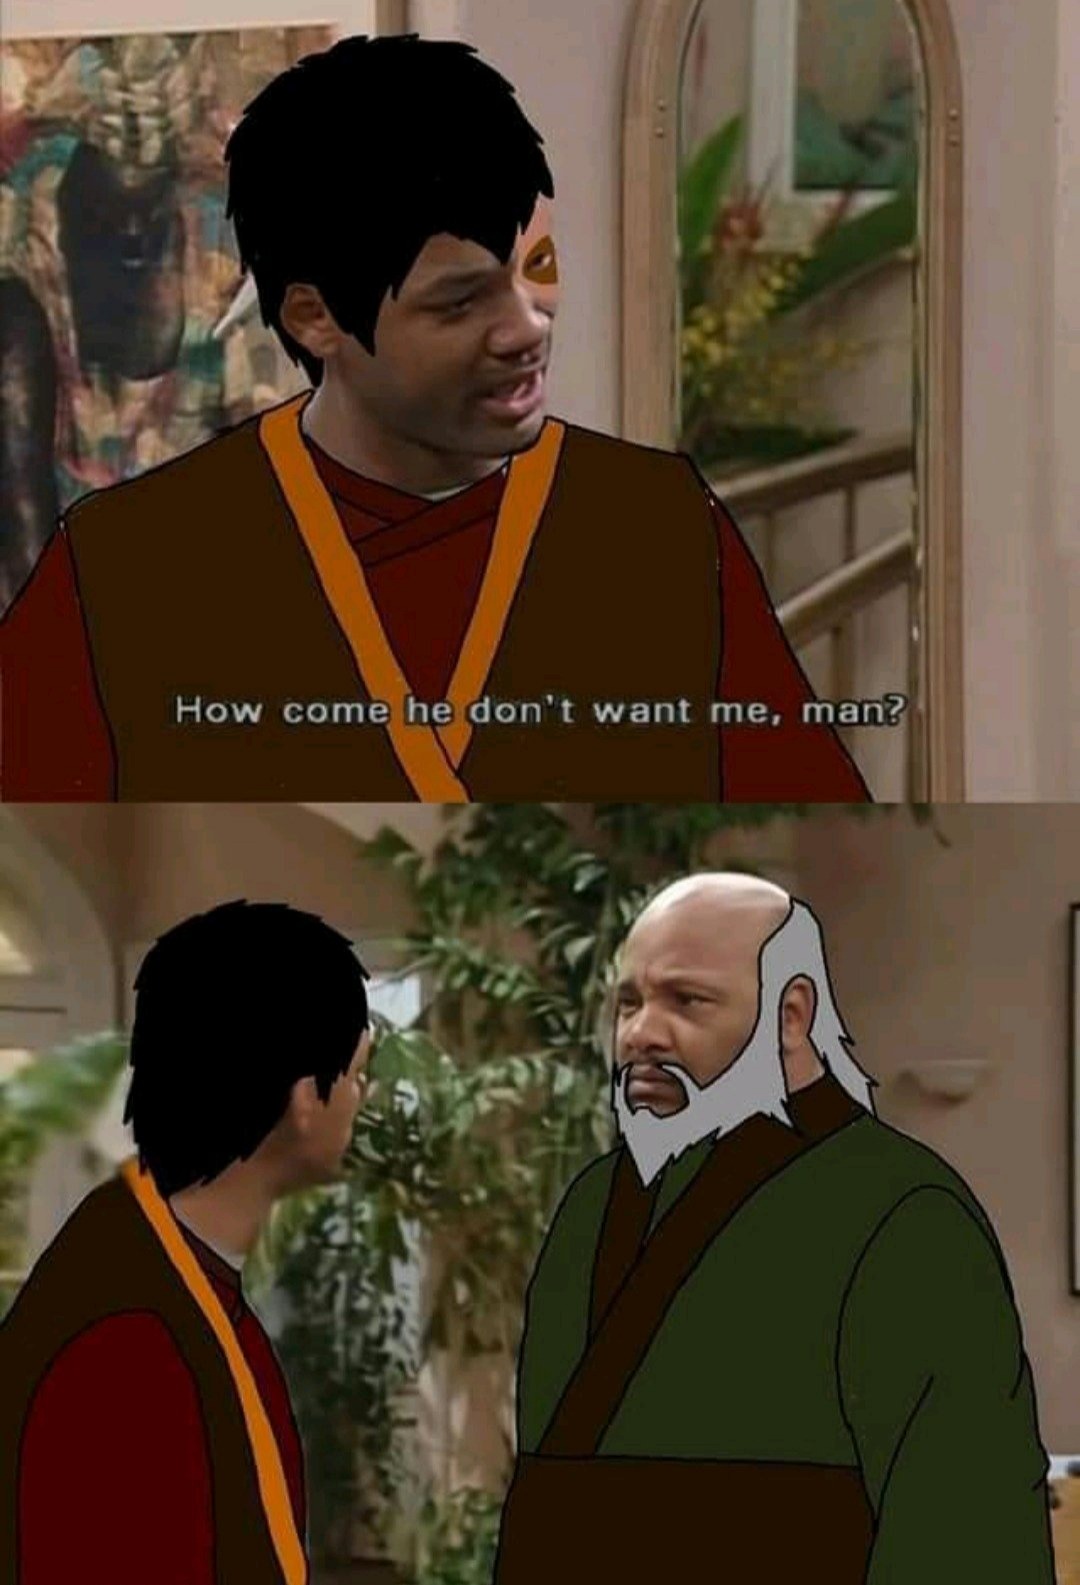 I haven't watched Avatar in a while - meme